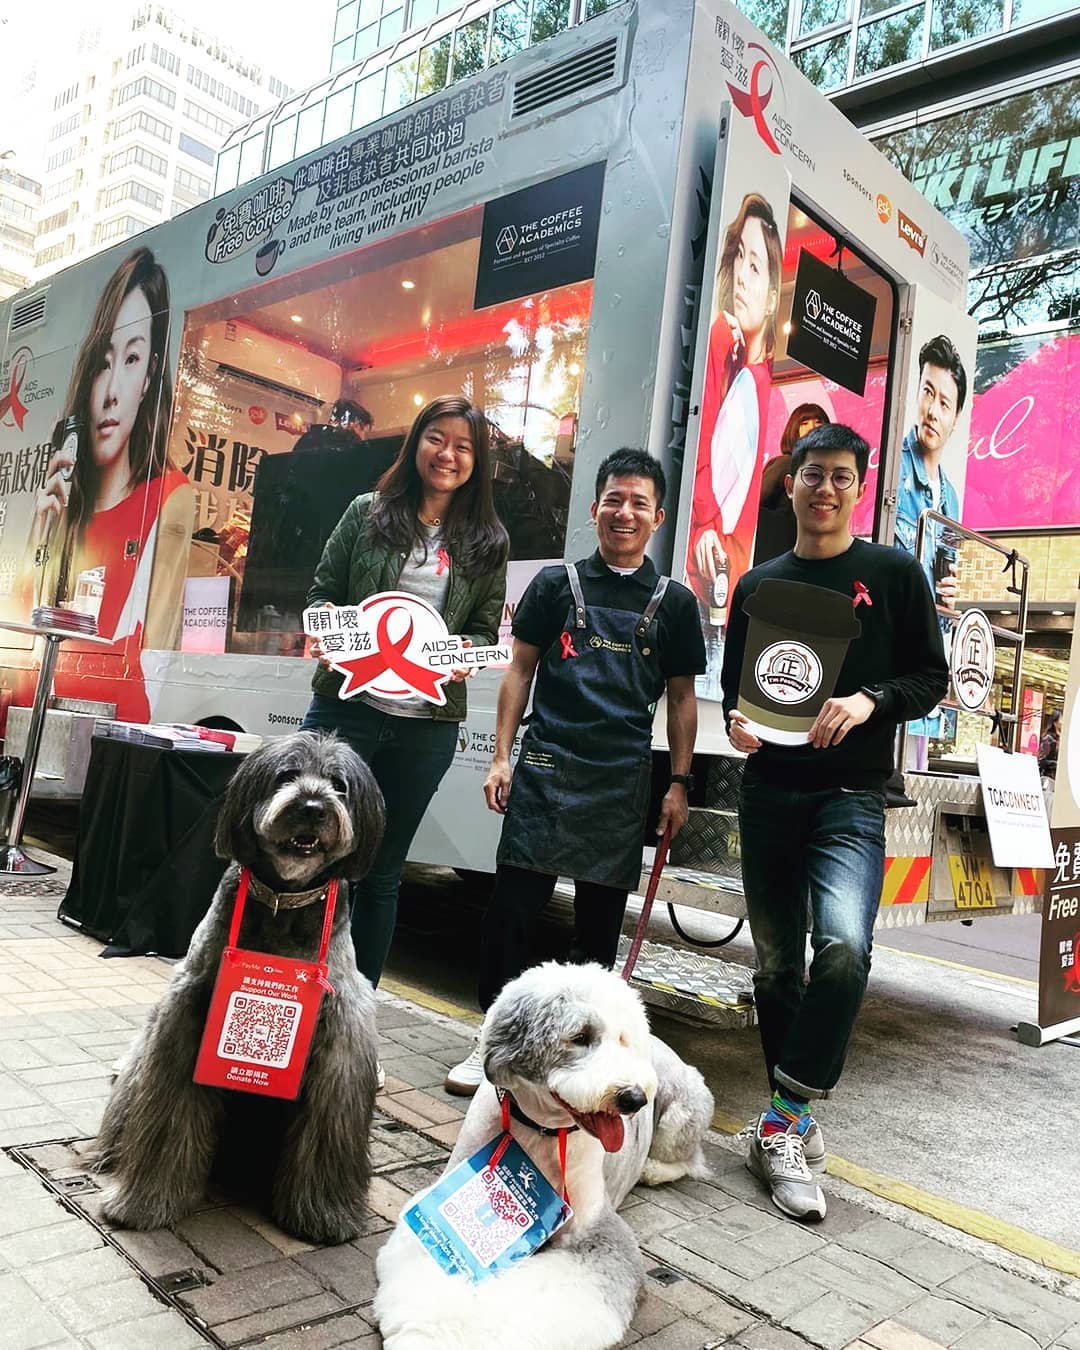 #WorldAidsDay We are giving away FREE specialty coffee in Tsim Sha Tsui today in support of Anti-stigma Campaign @AIDS_Concern in Hong Kong. ☕ Free coffee for the freedom of all HIV positive people to live freely like everyone else! 📍Spot us in @AIDS_Concern x @TheCoffeeAcademics Coffee Mobile truck at Tsim Sha Tsui towards Canton Road, behind the mosque. (Swipe to see our map location!)... Will be giving away coffee the whole day! See you all. ______